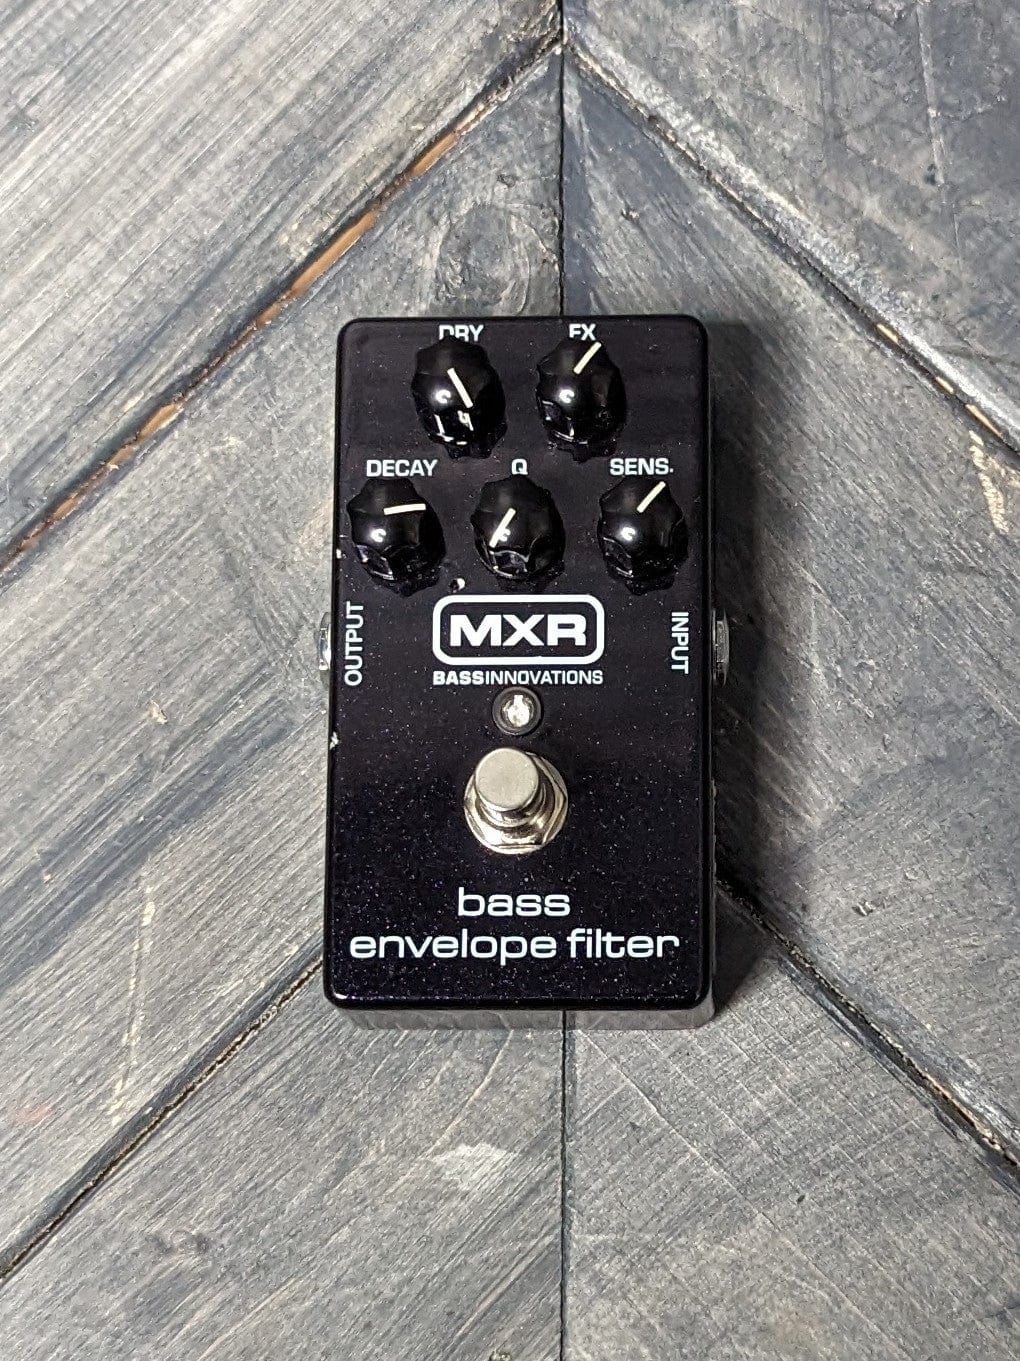 Used MXR Bass Envelope Filter top of the pedal